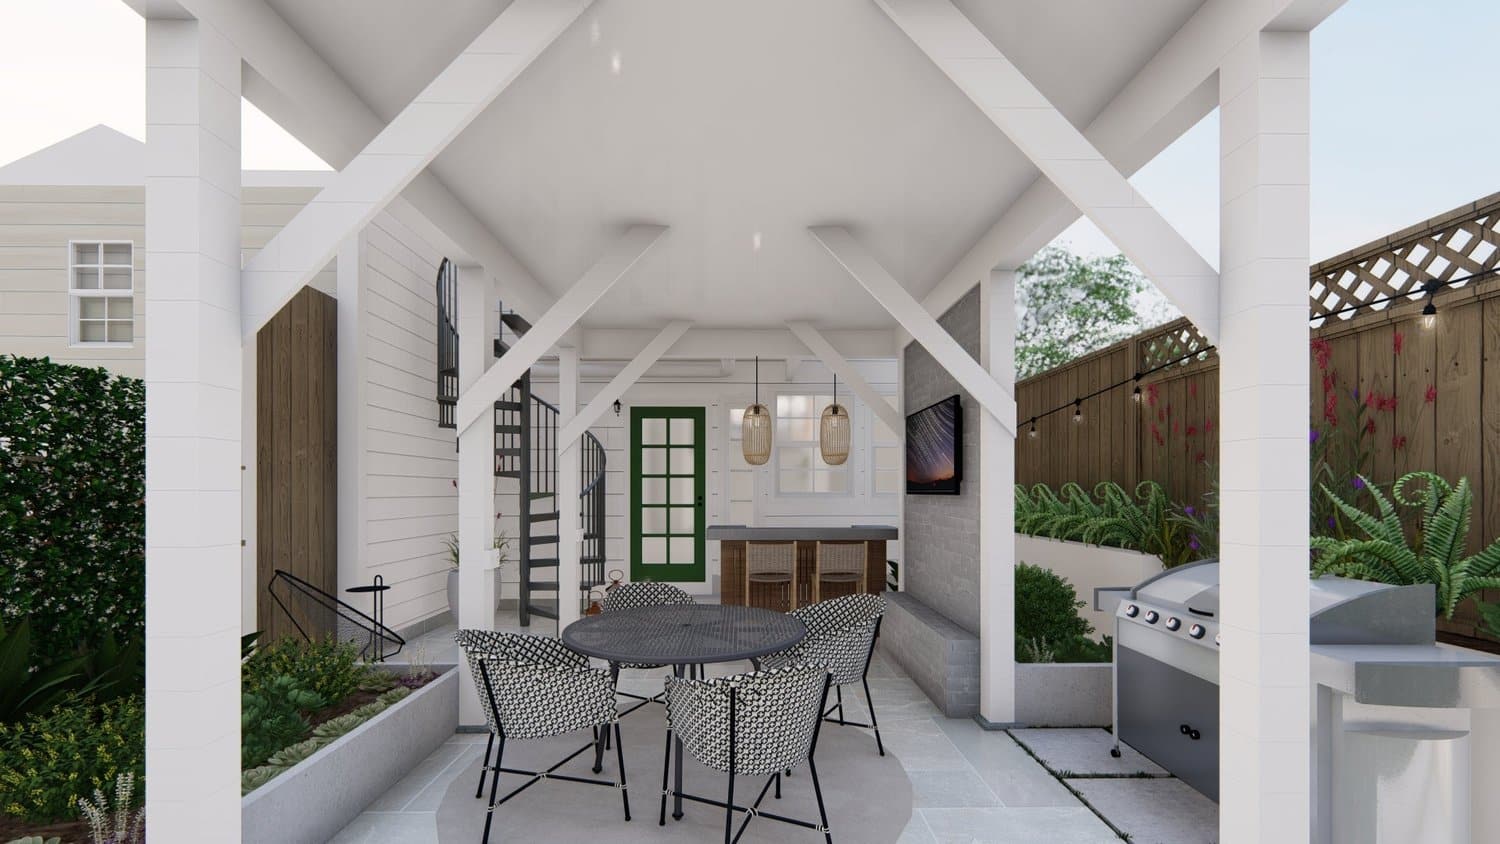 San Francisco patio with pergola dining area and outdoor kitchen